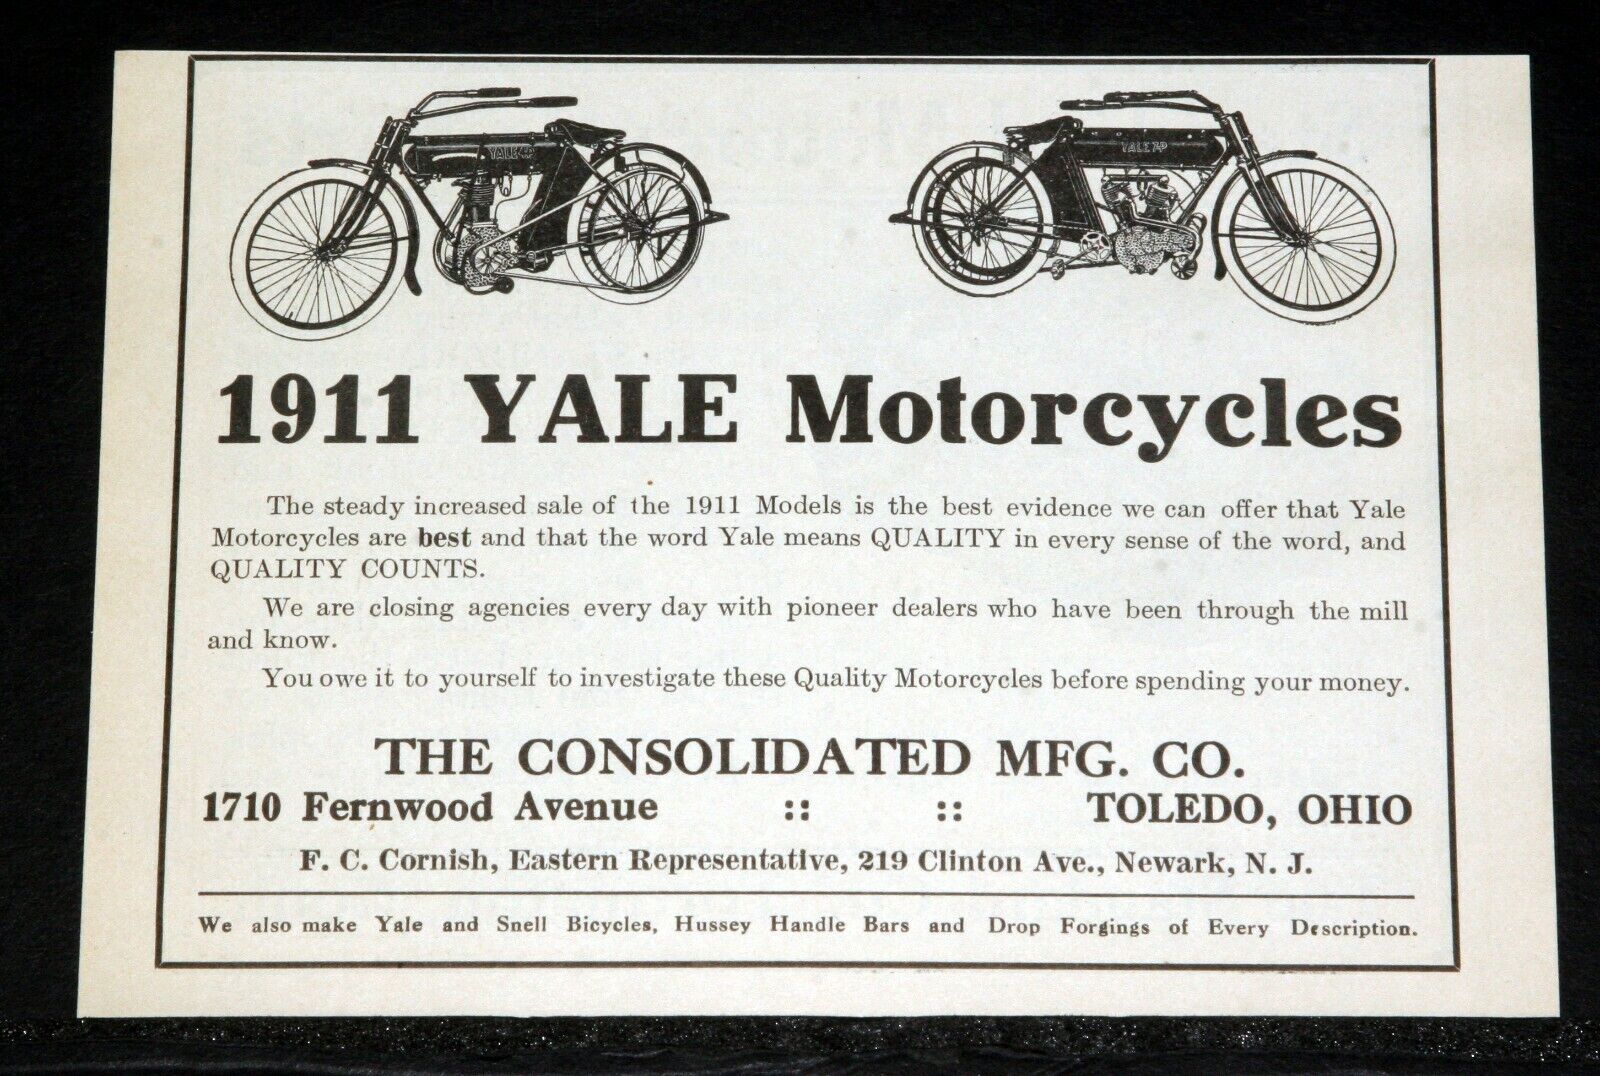 1911 OLD MAGAZINE PRINT AD, THE 1911 YALE MOTORCYCLES, QUALITY IN EVERY SENSE